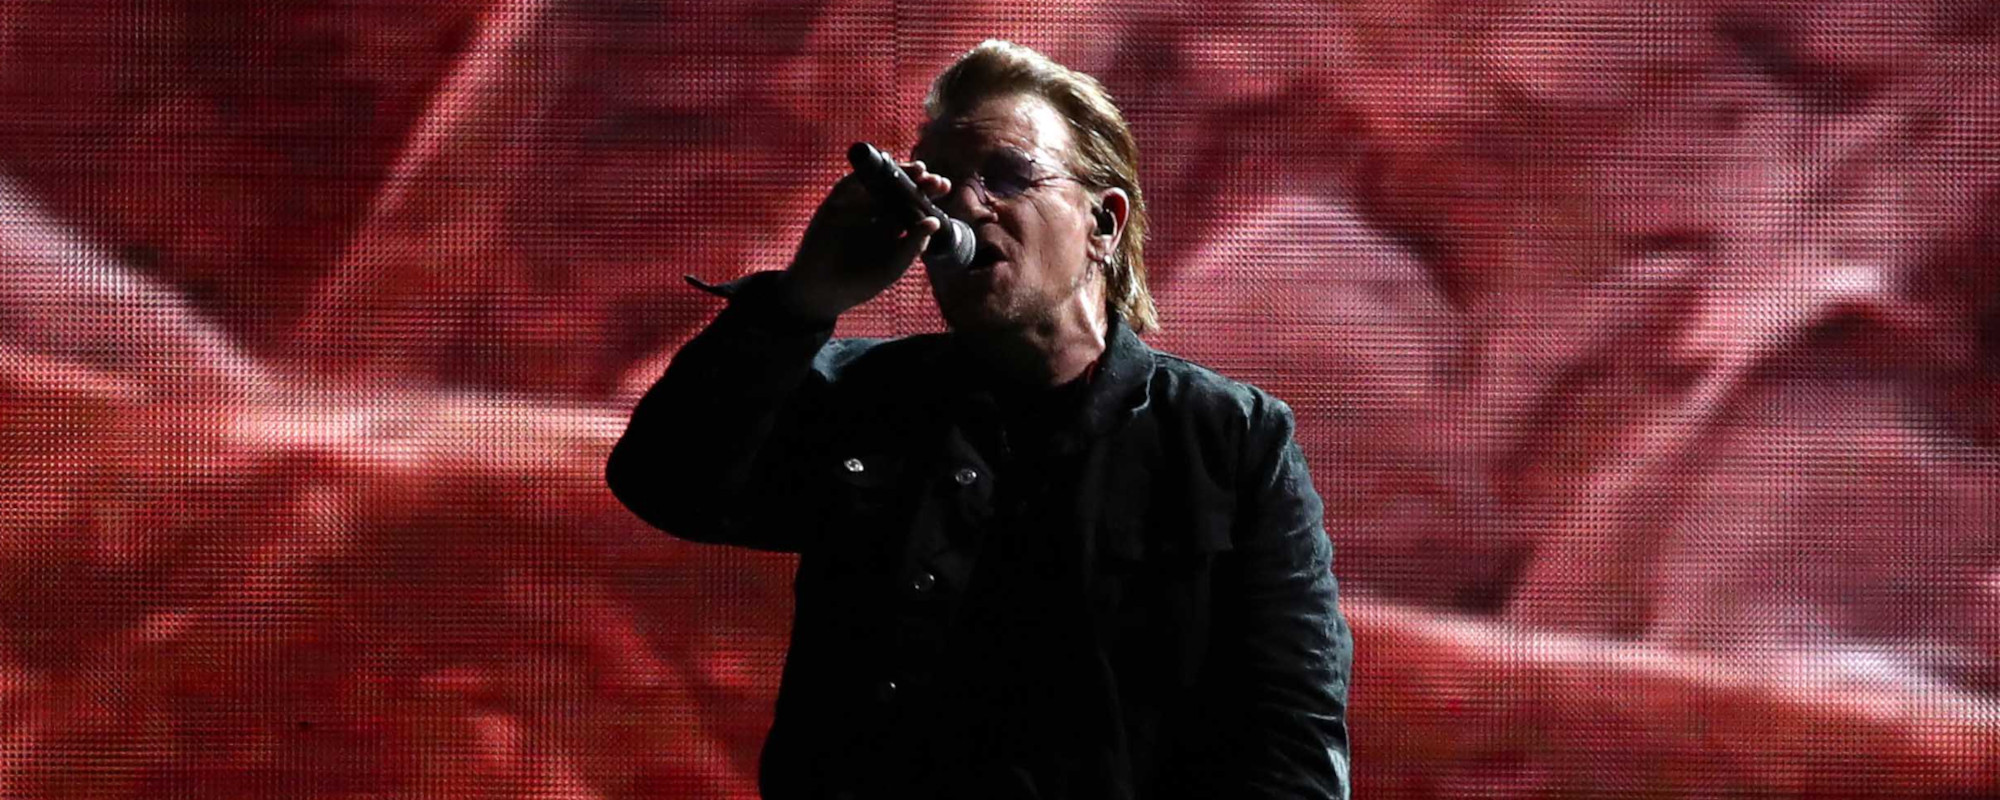 Bono Extends Book Tour with New York City Residency in 2023